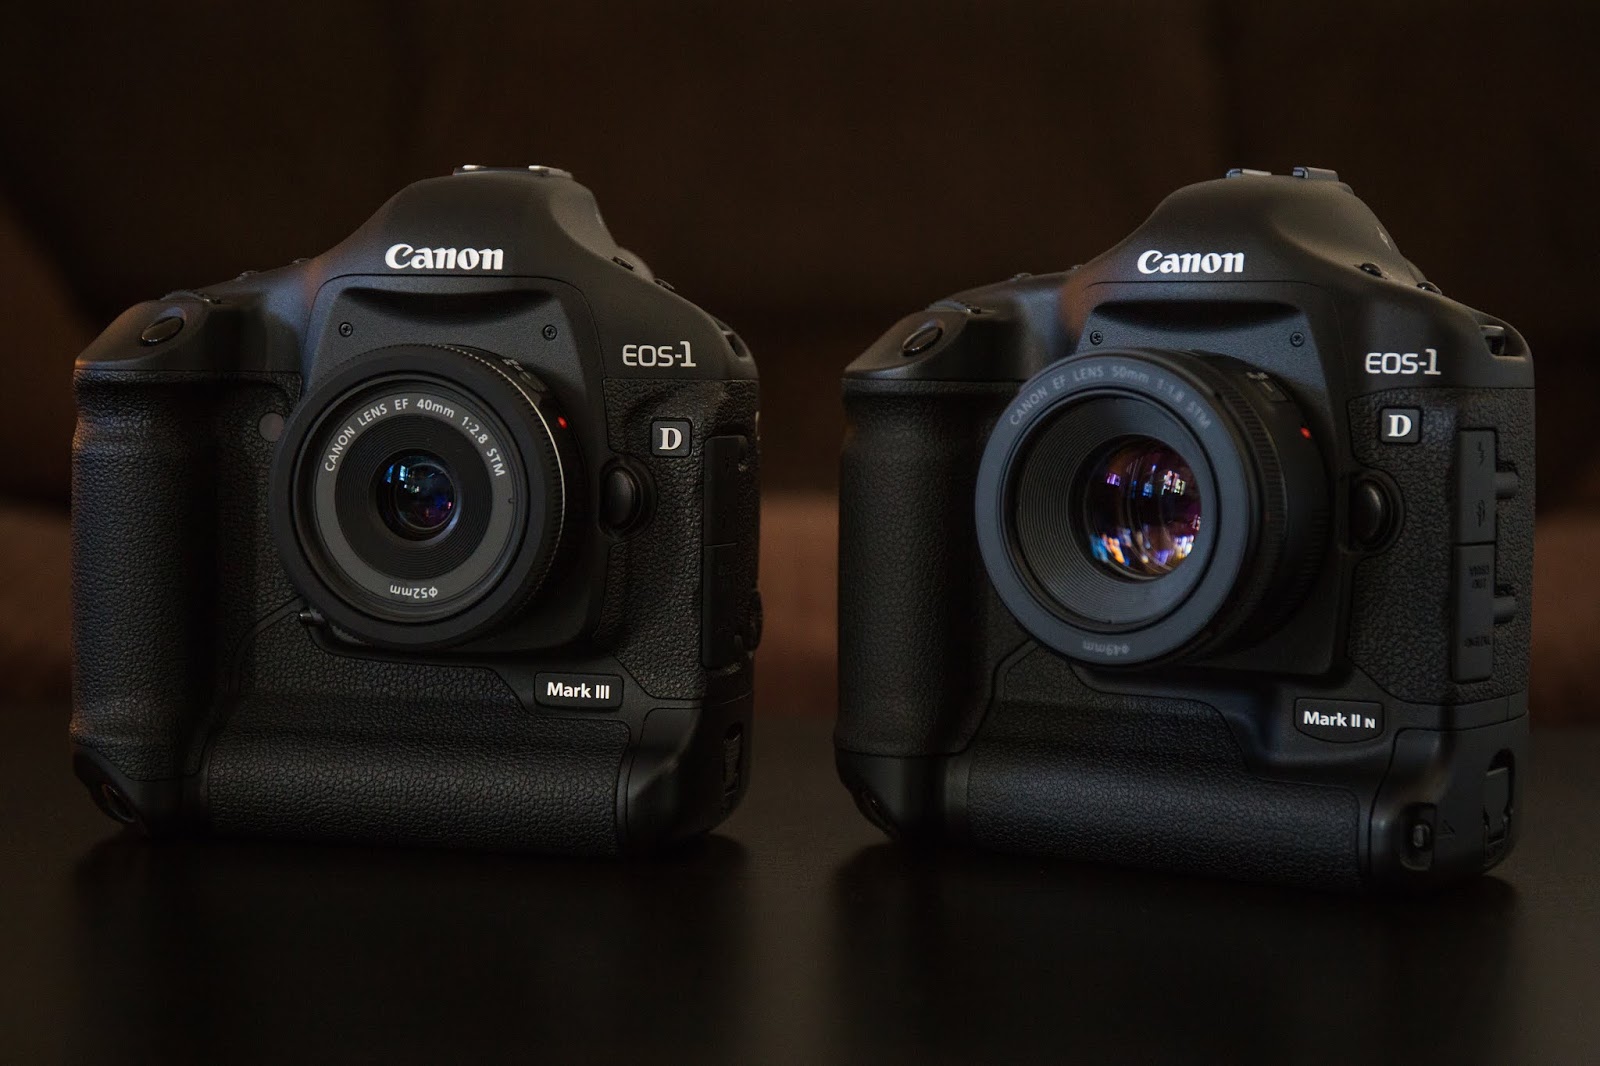 Guest Post: Canon EOS-1D Mark III and EOS-1D Mark II N - Two